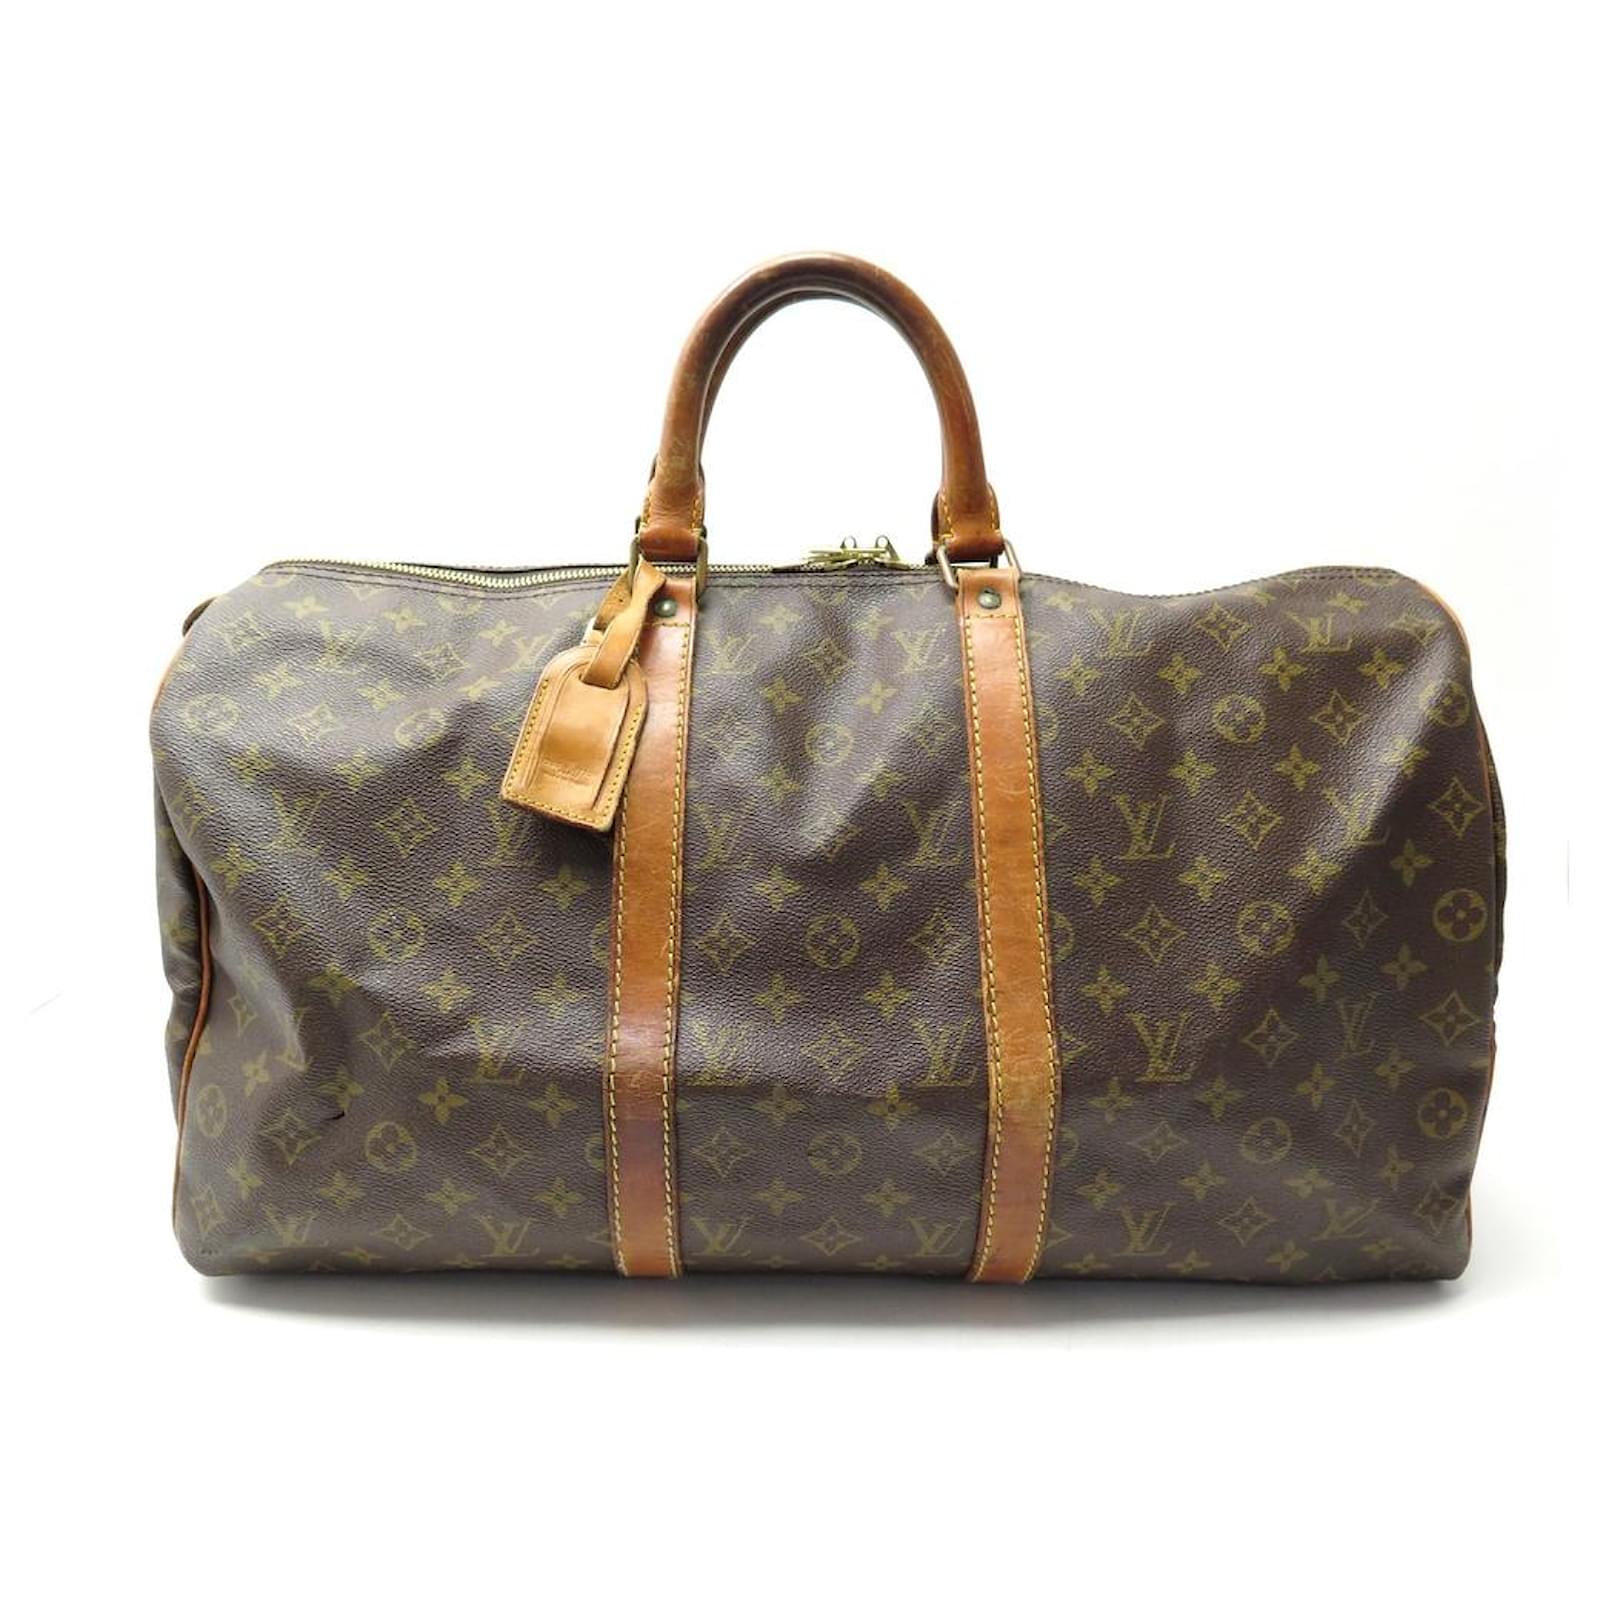 AUTHENTIC LOUIS VUITTON KEEPALL 50 DUFFLE BAG FOREVER MONOGRAM